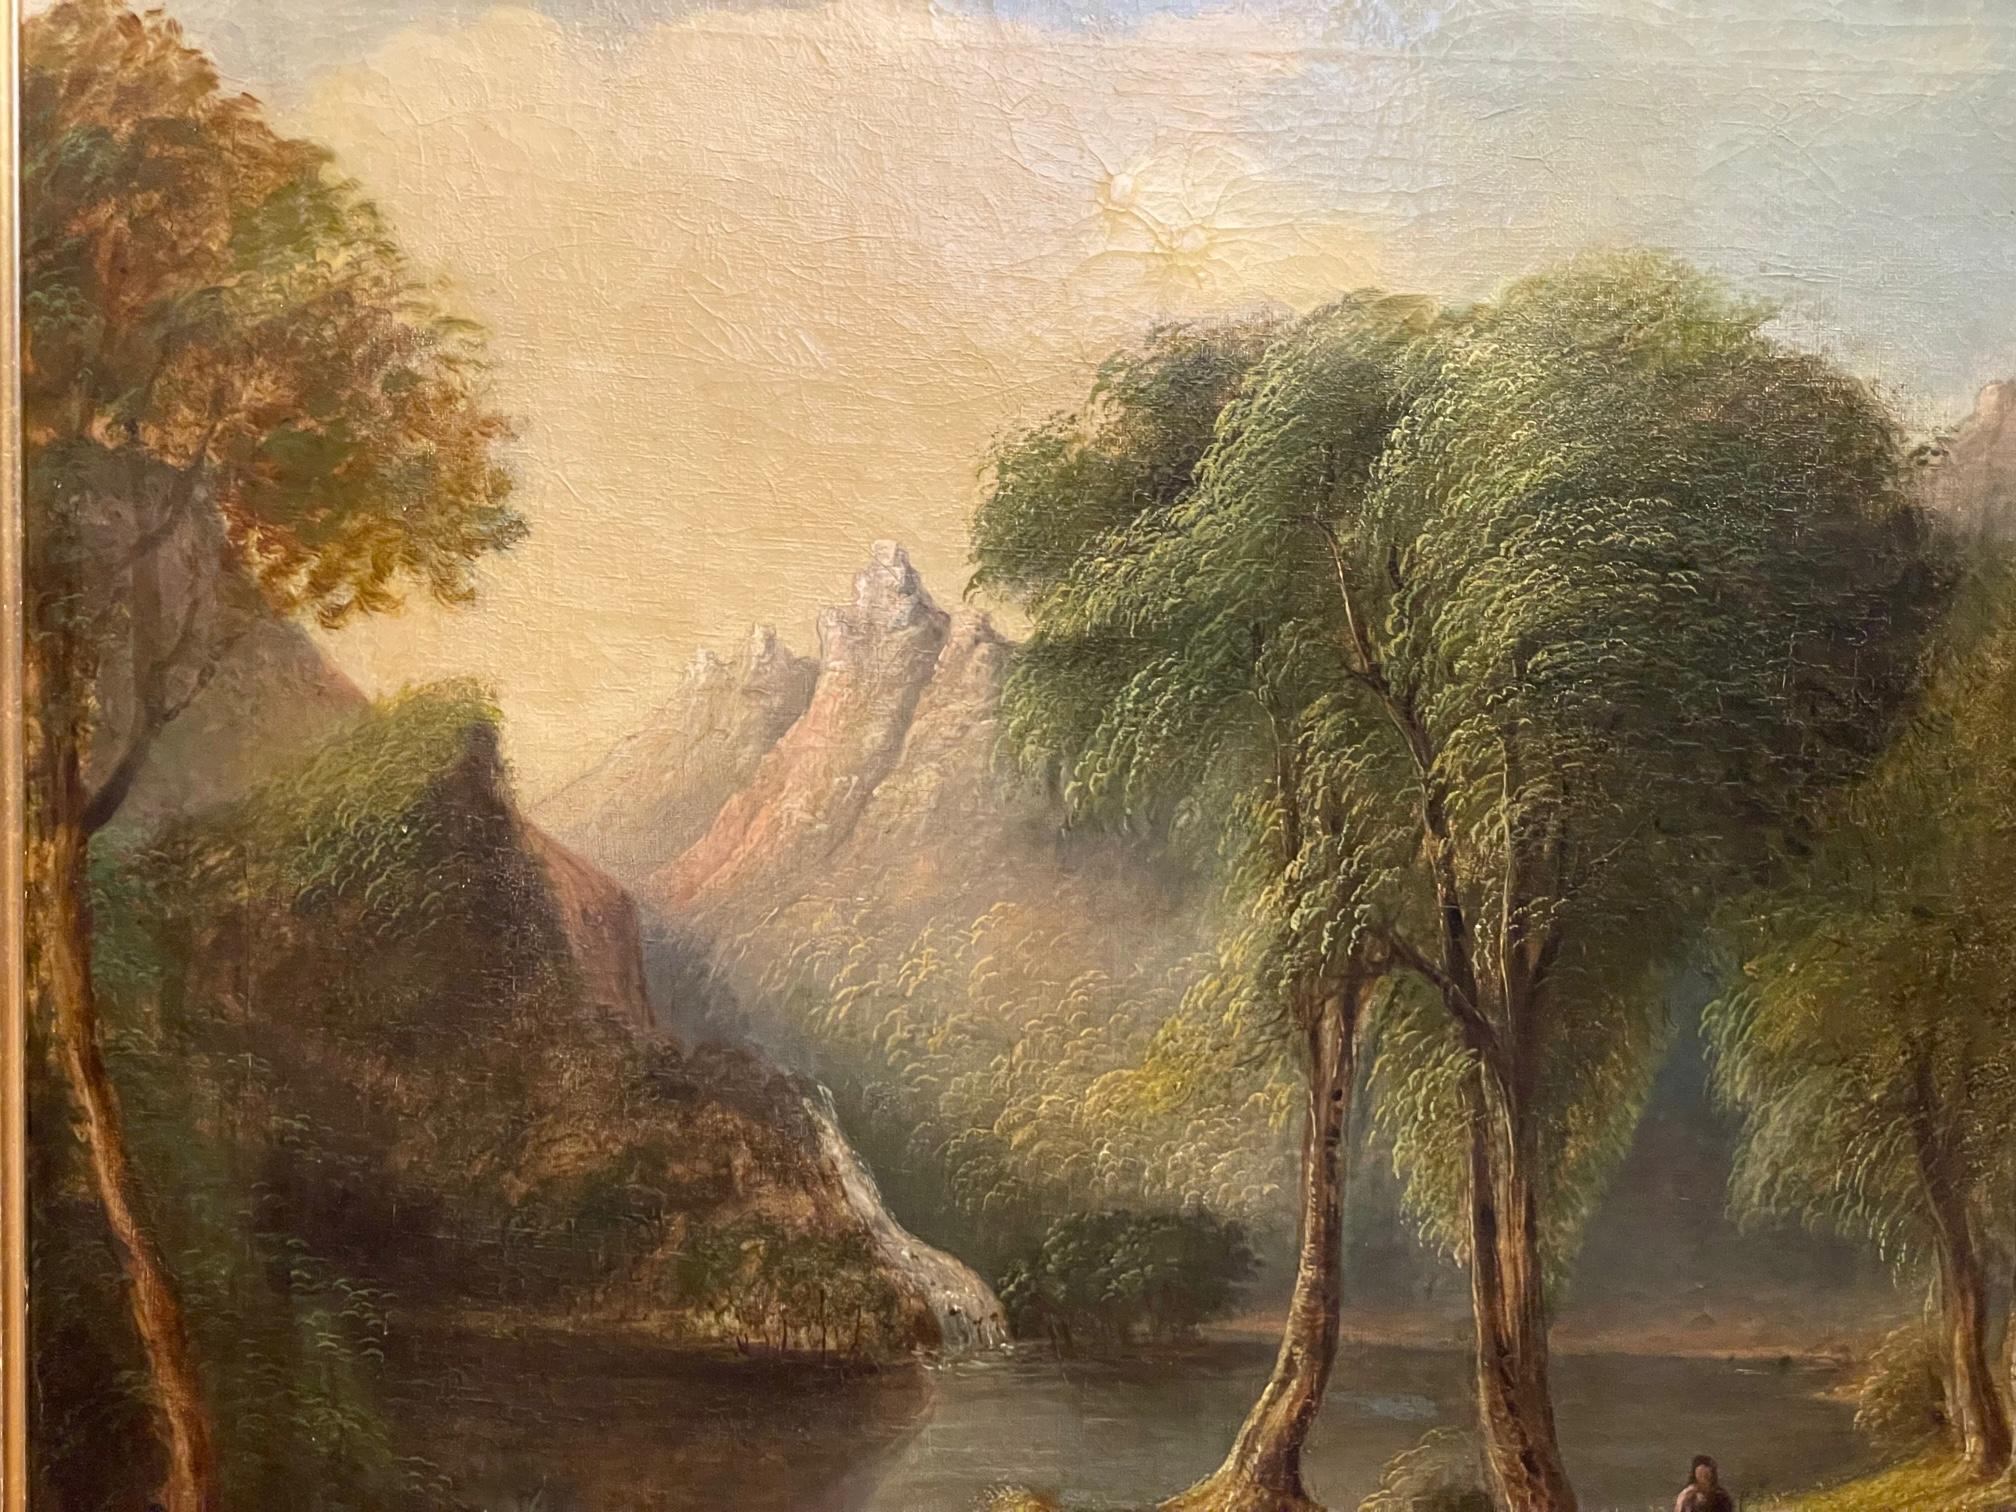 Golden tree with mountain and stream, flock of sheep - Brown Landscape Painting by Samuel Bough